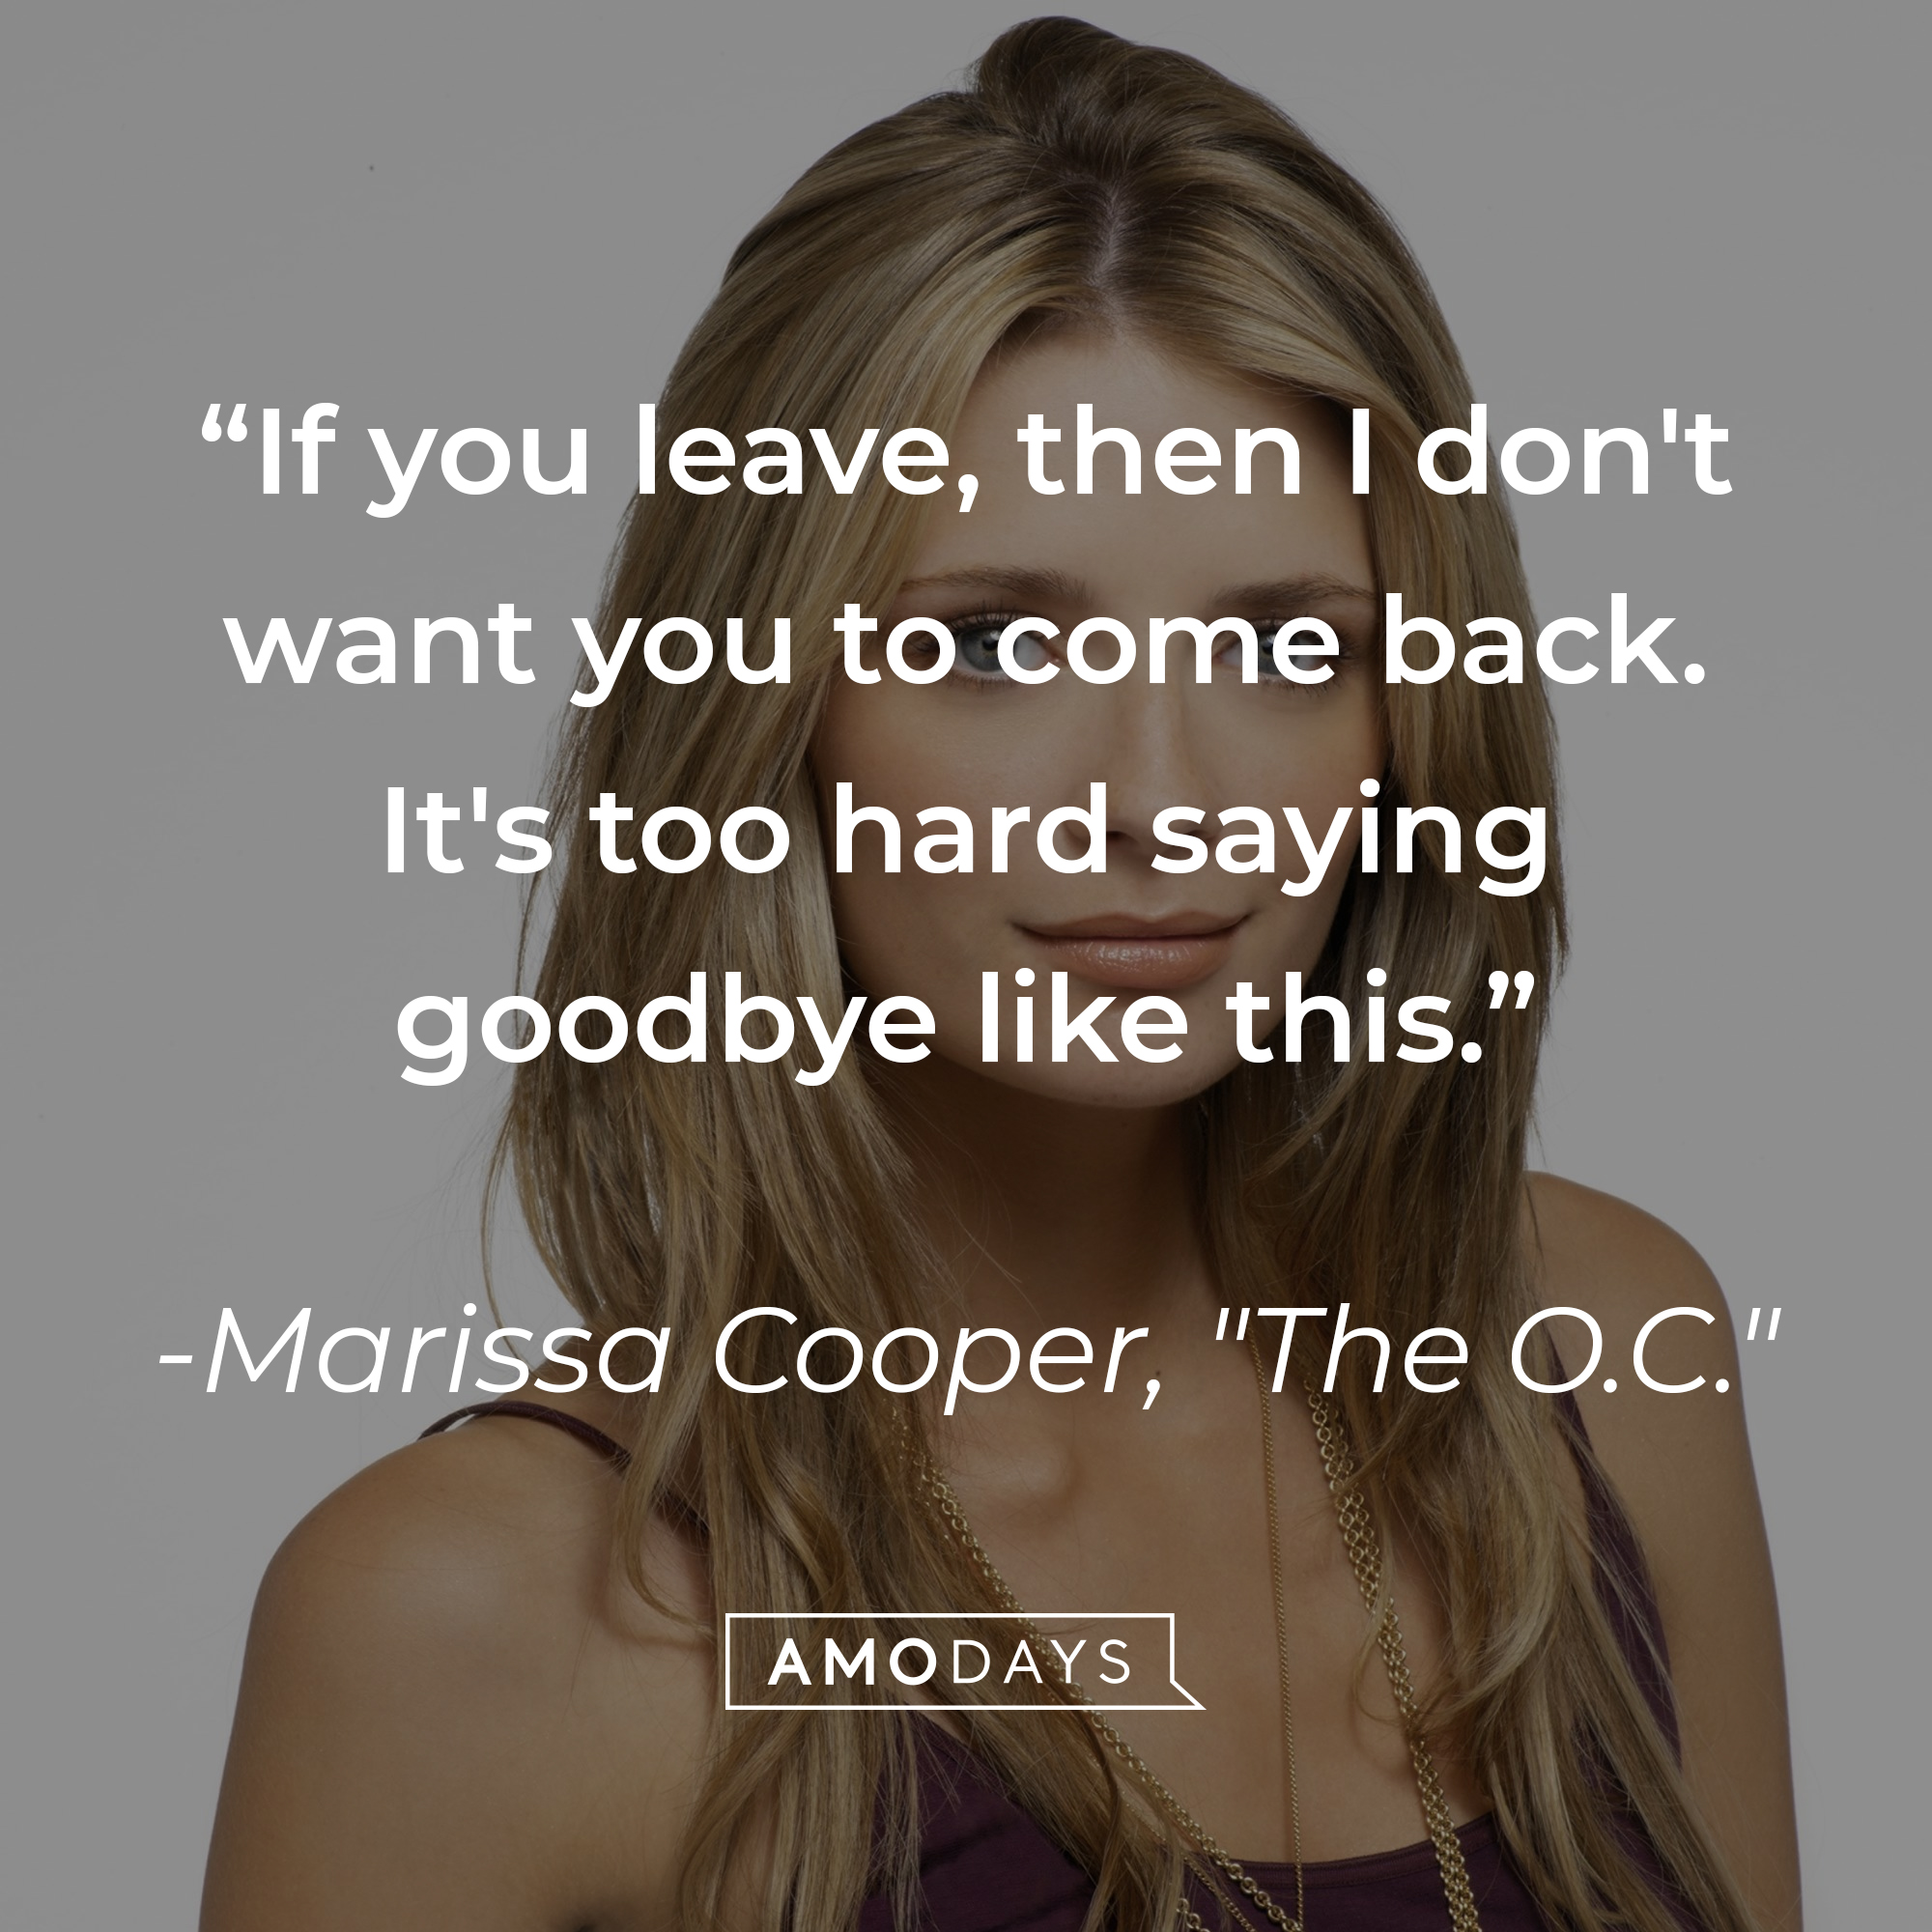 Marissa Cooper's quote: "If you leave, then I don't want you to come back. It's too hard saying goodbye like this." | Source: Facebook.com/TheOC